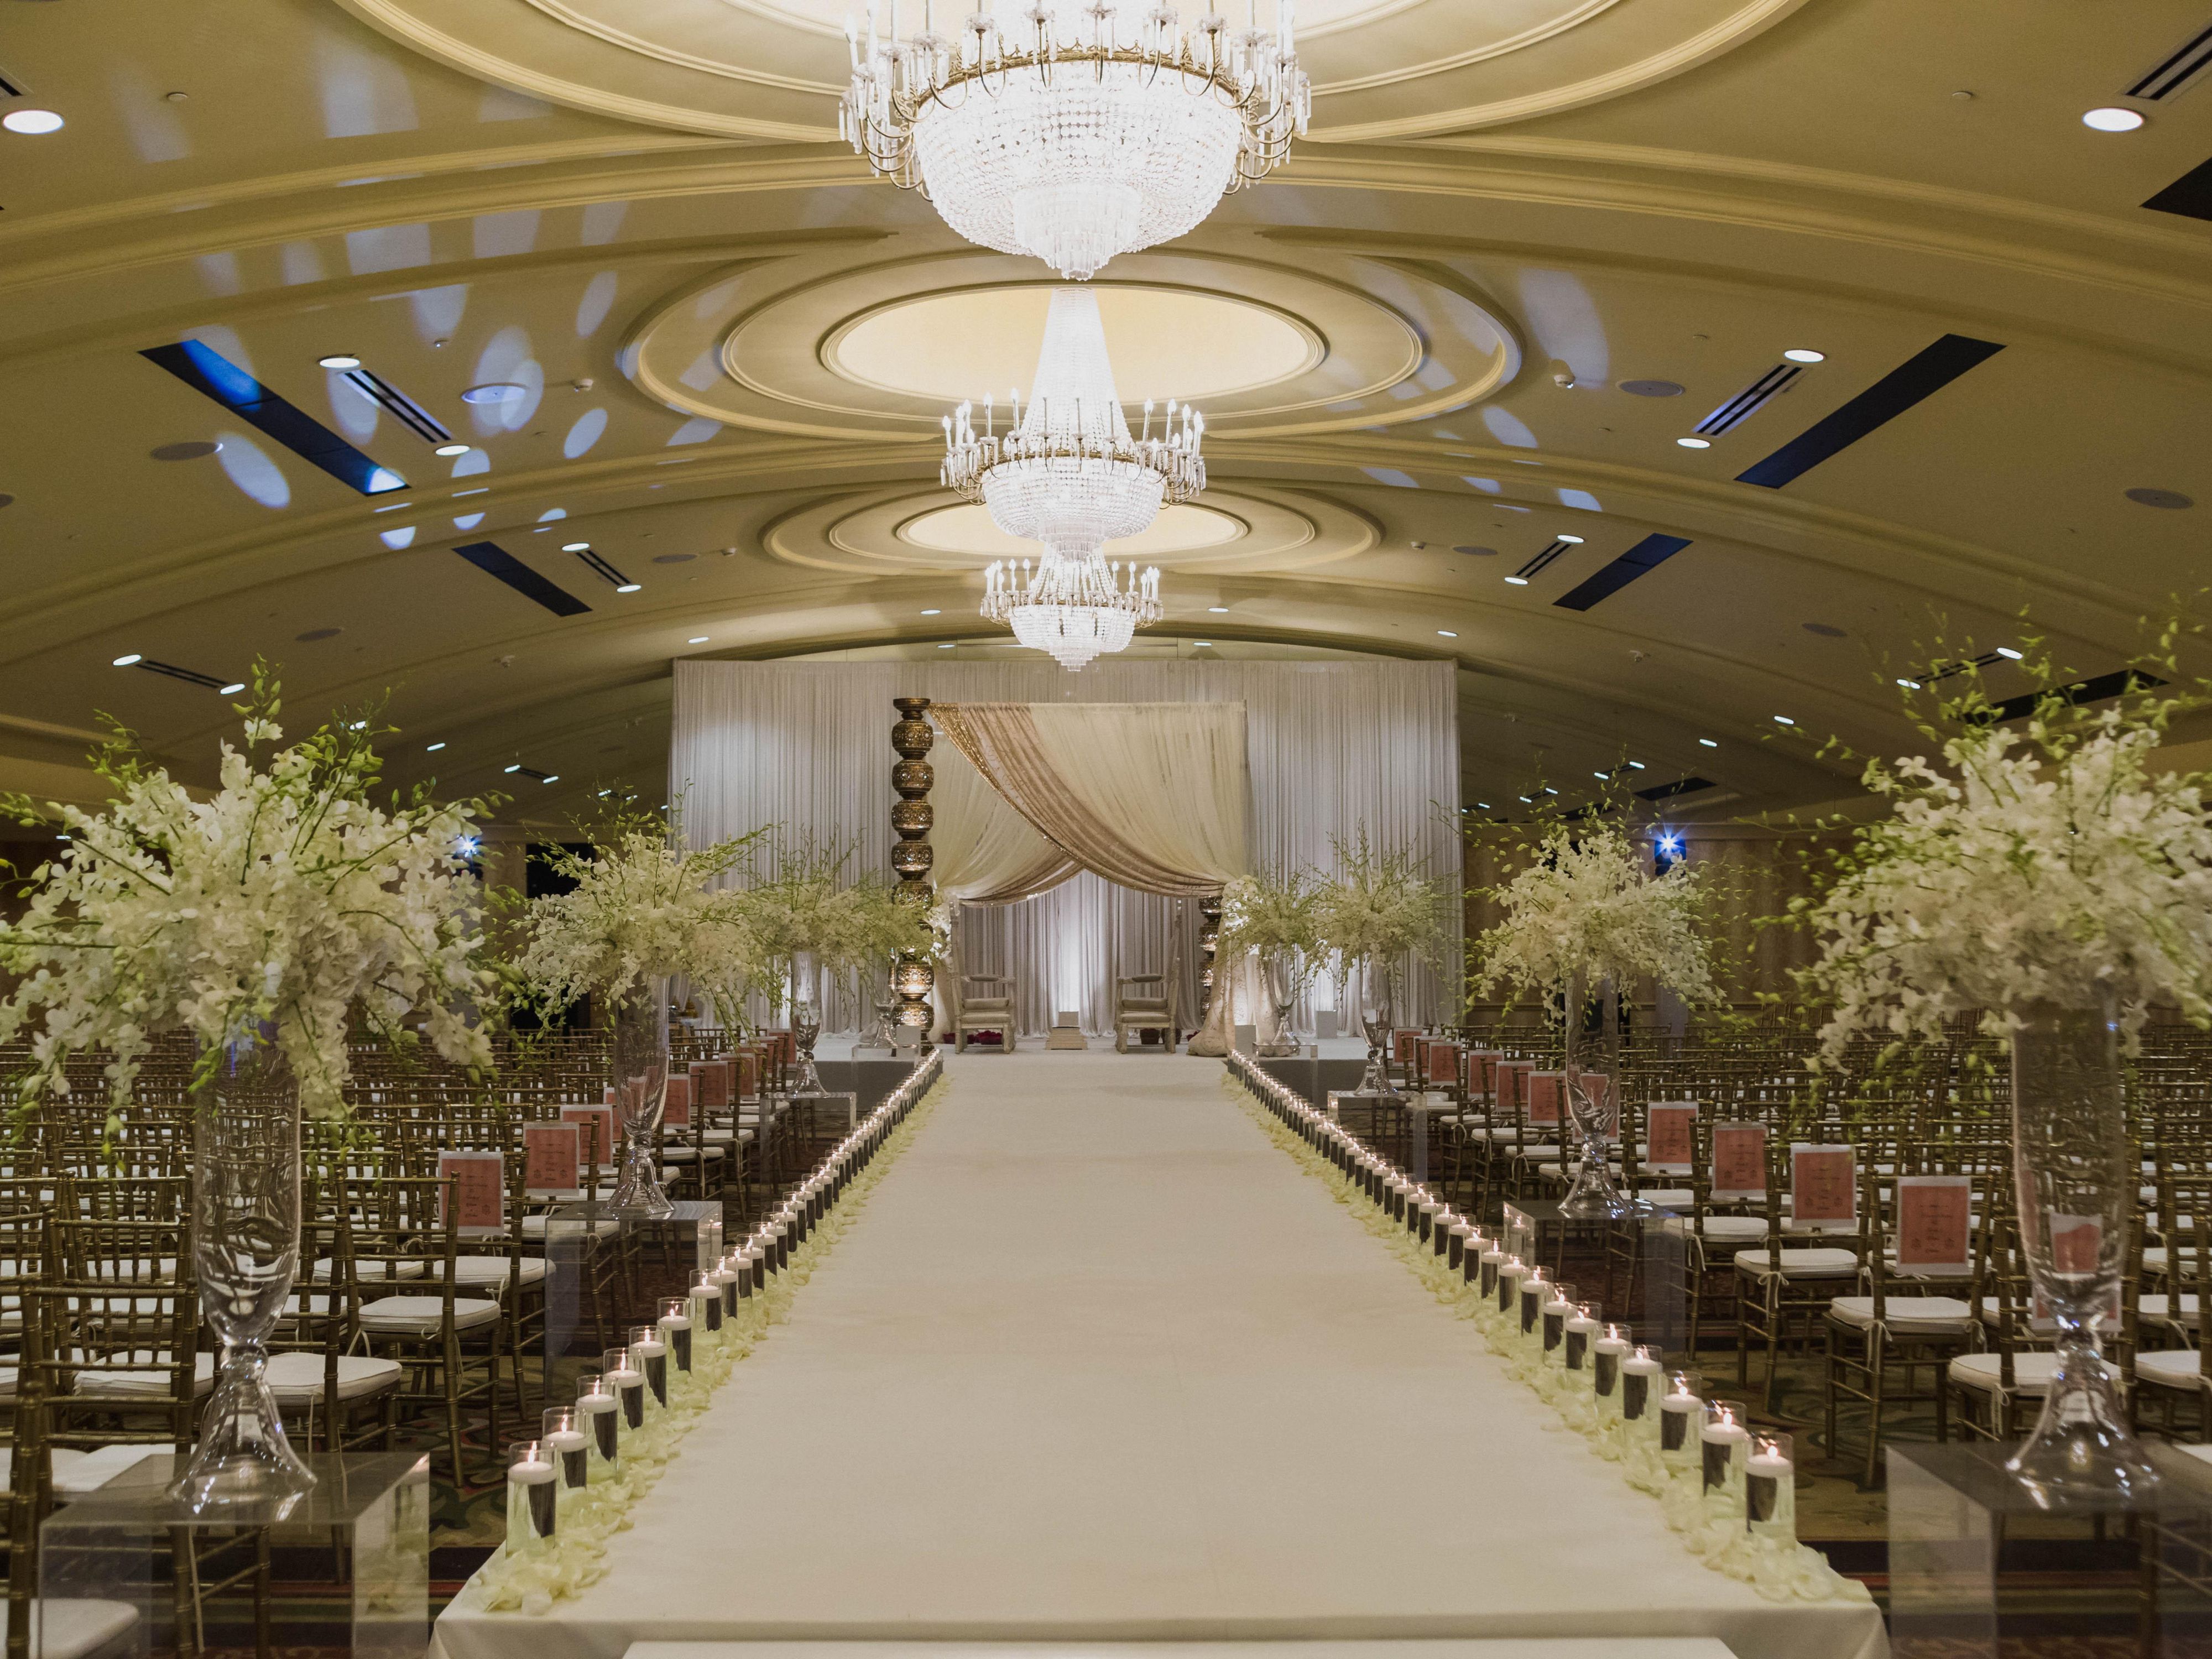 Wedding venue with plenty of seating and walkway leading up to the alter